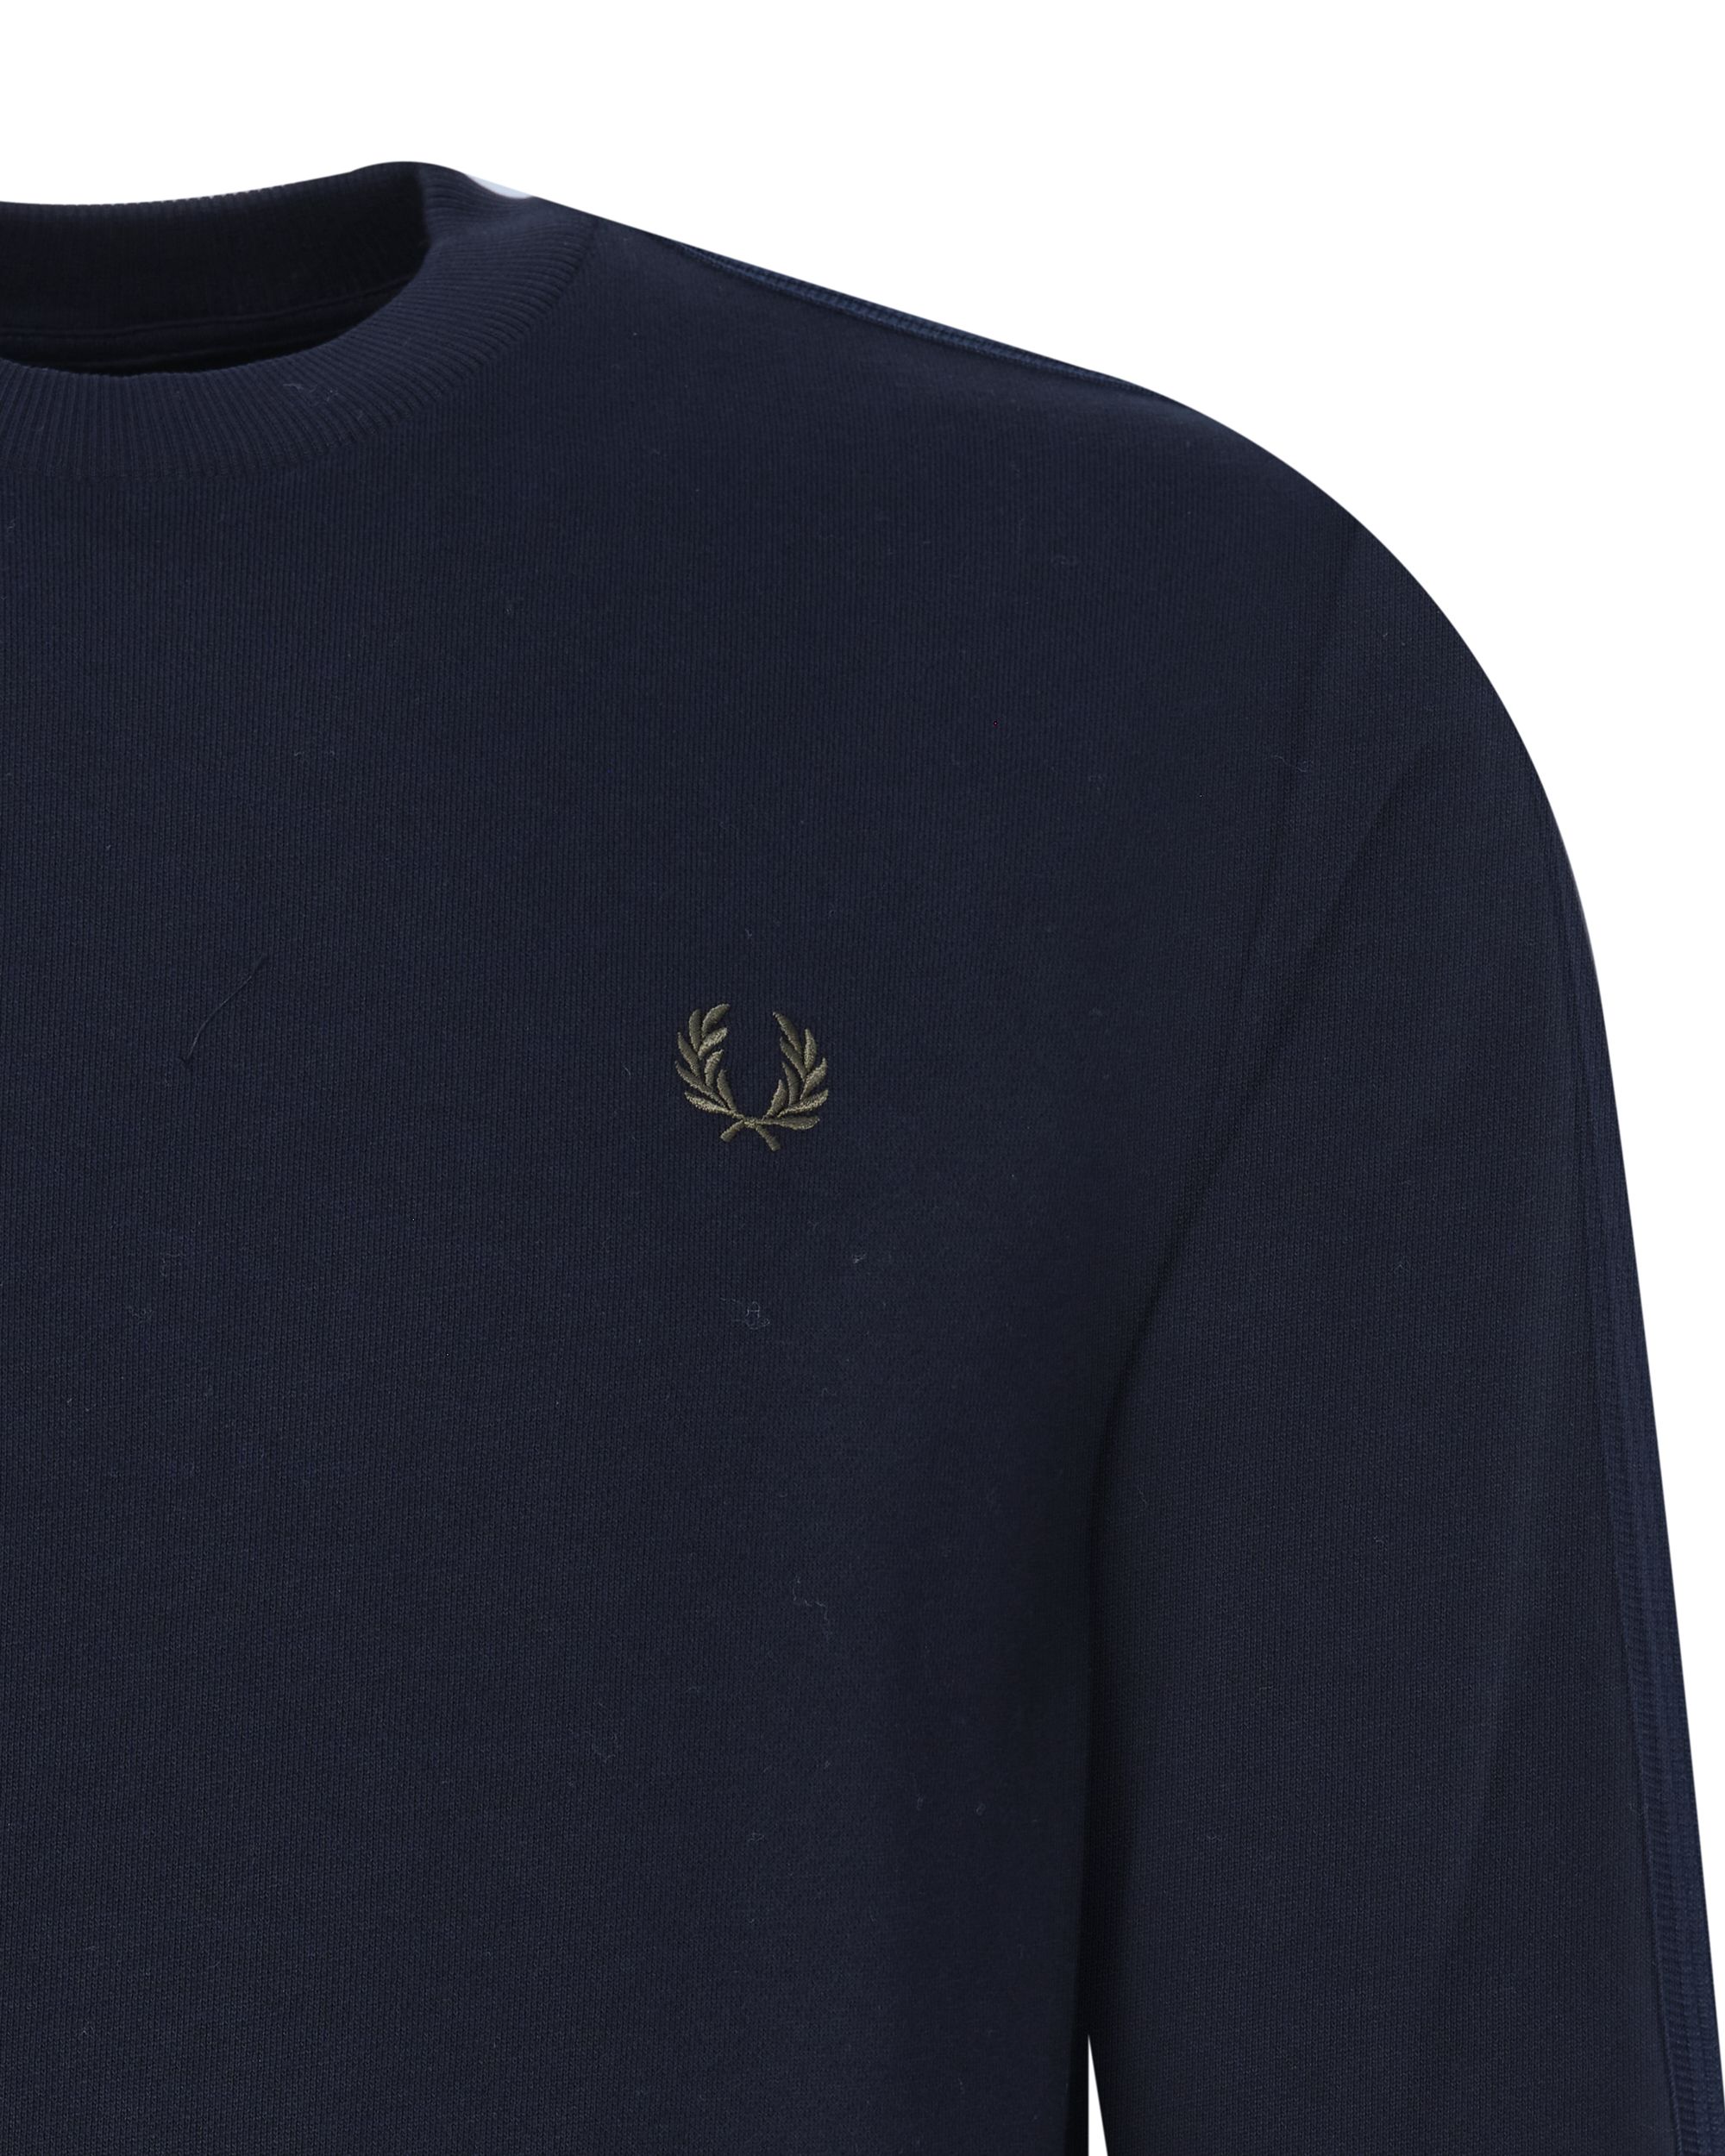 Fred Perry Sweater Zwart 080355-001-L